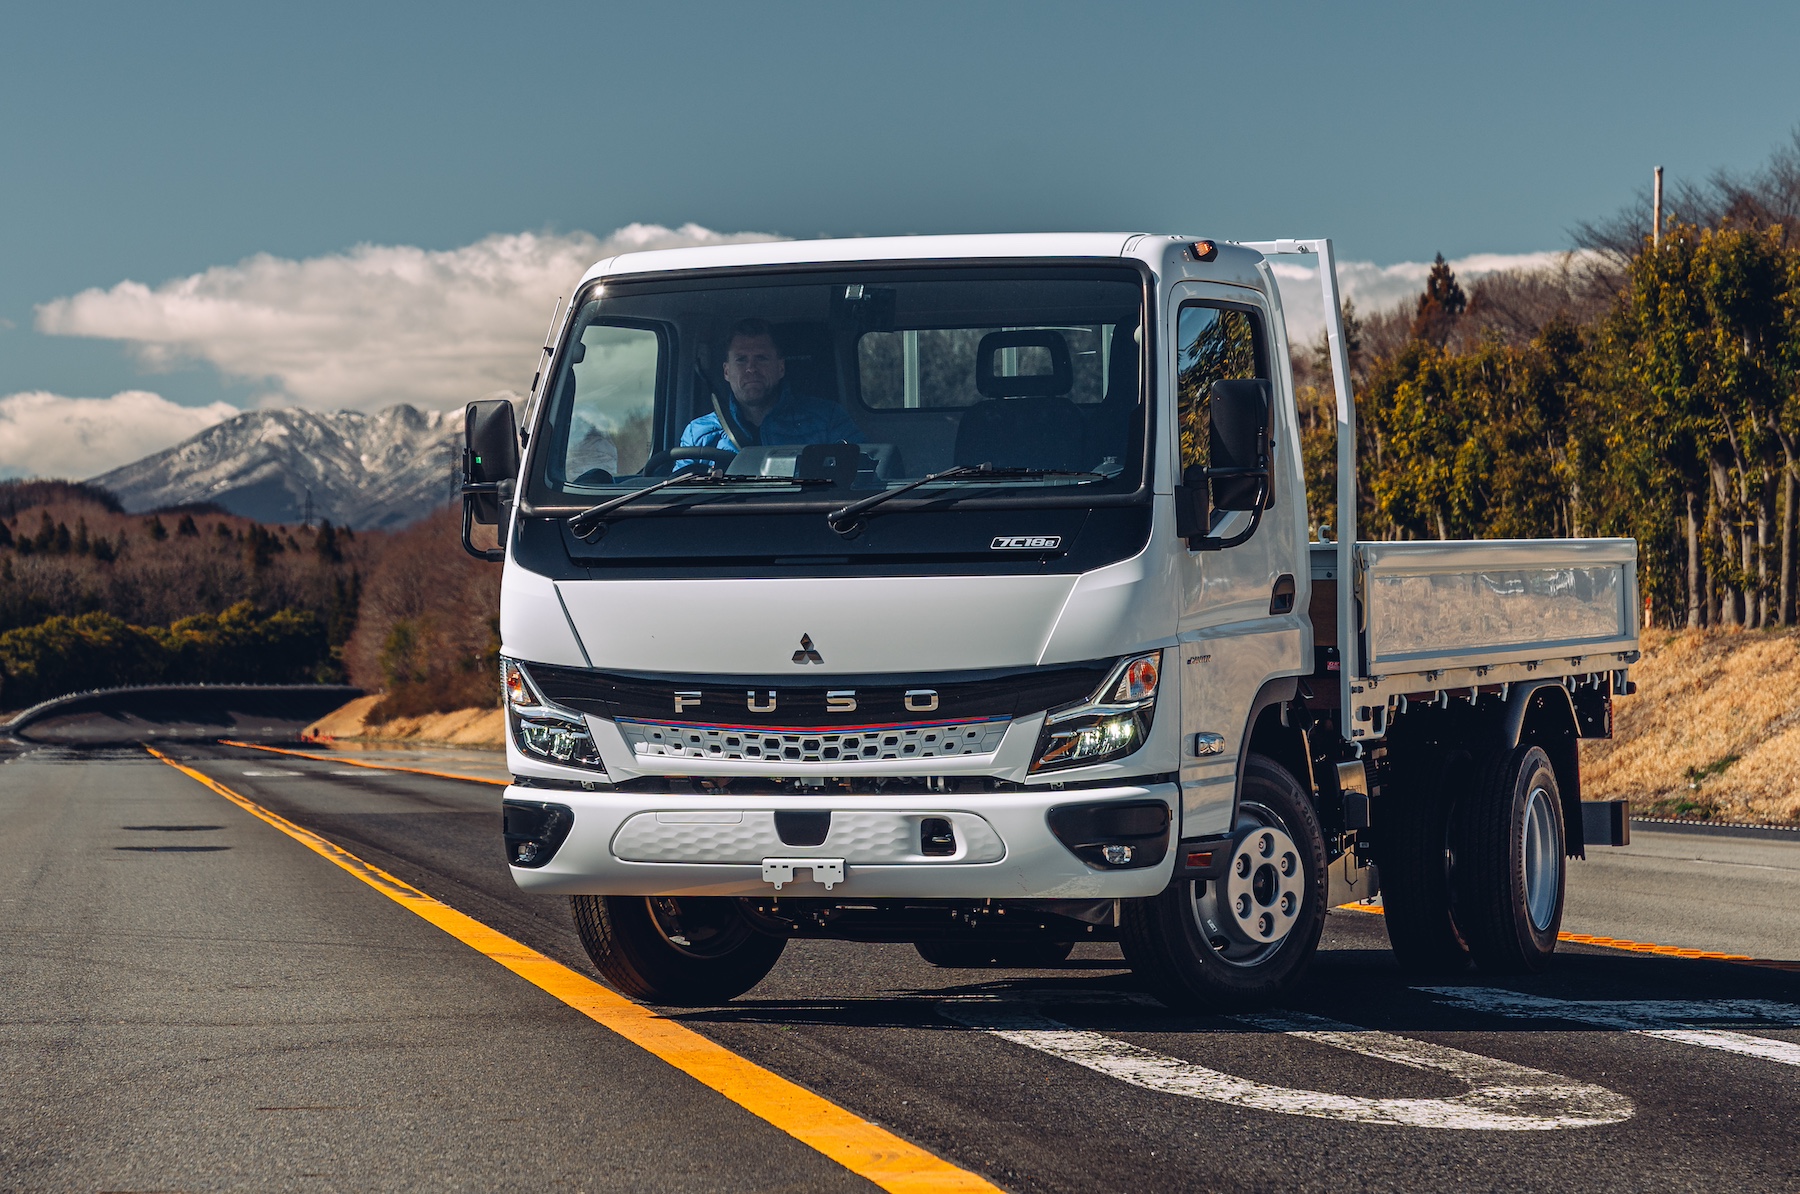 New Fuso eCanter electric truck with comprehensive updates introduced | electrive.com – www.electrive.com